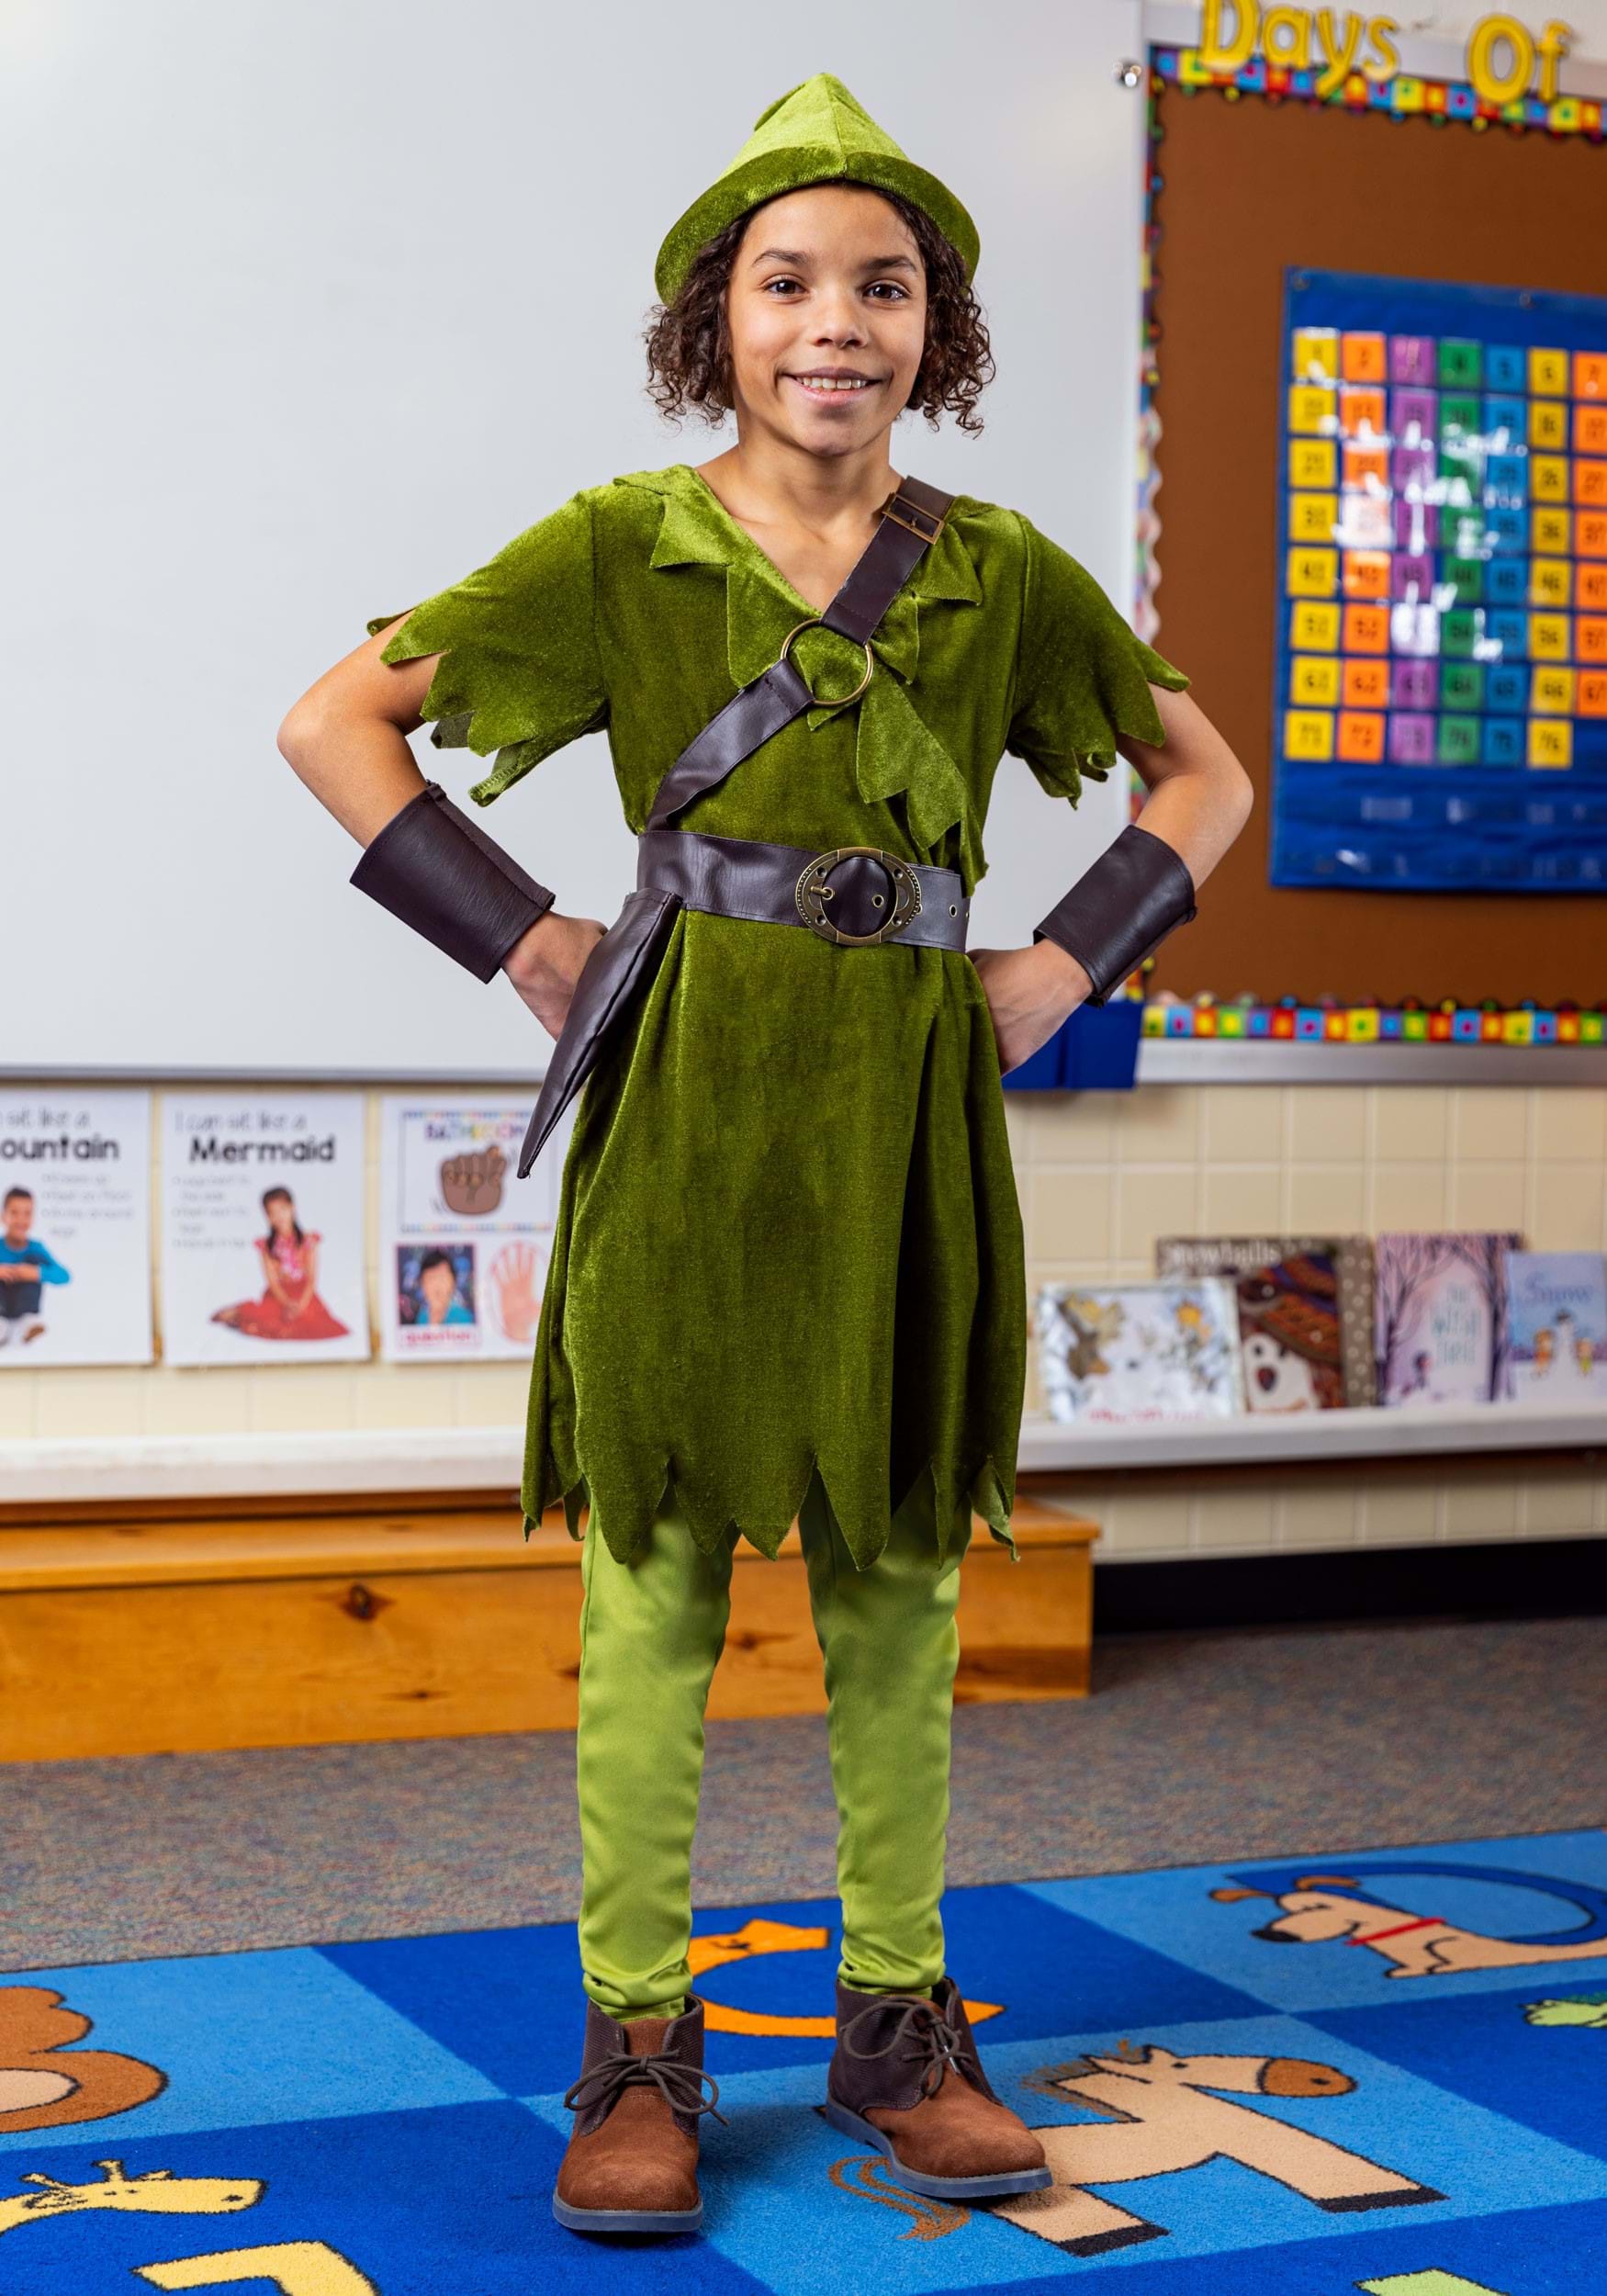 Kid's Peter Pan Costume With Hat, Shirt, Tights, Belt/Harness And Wrist Cuffs